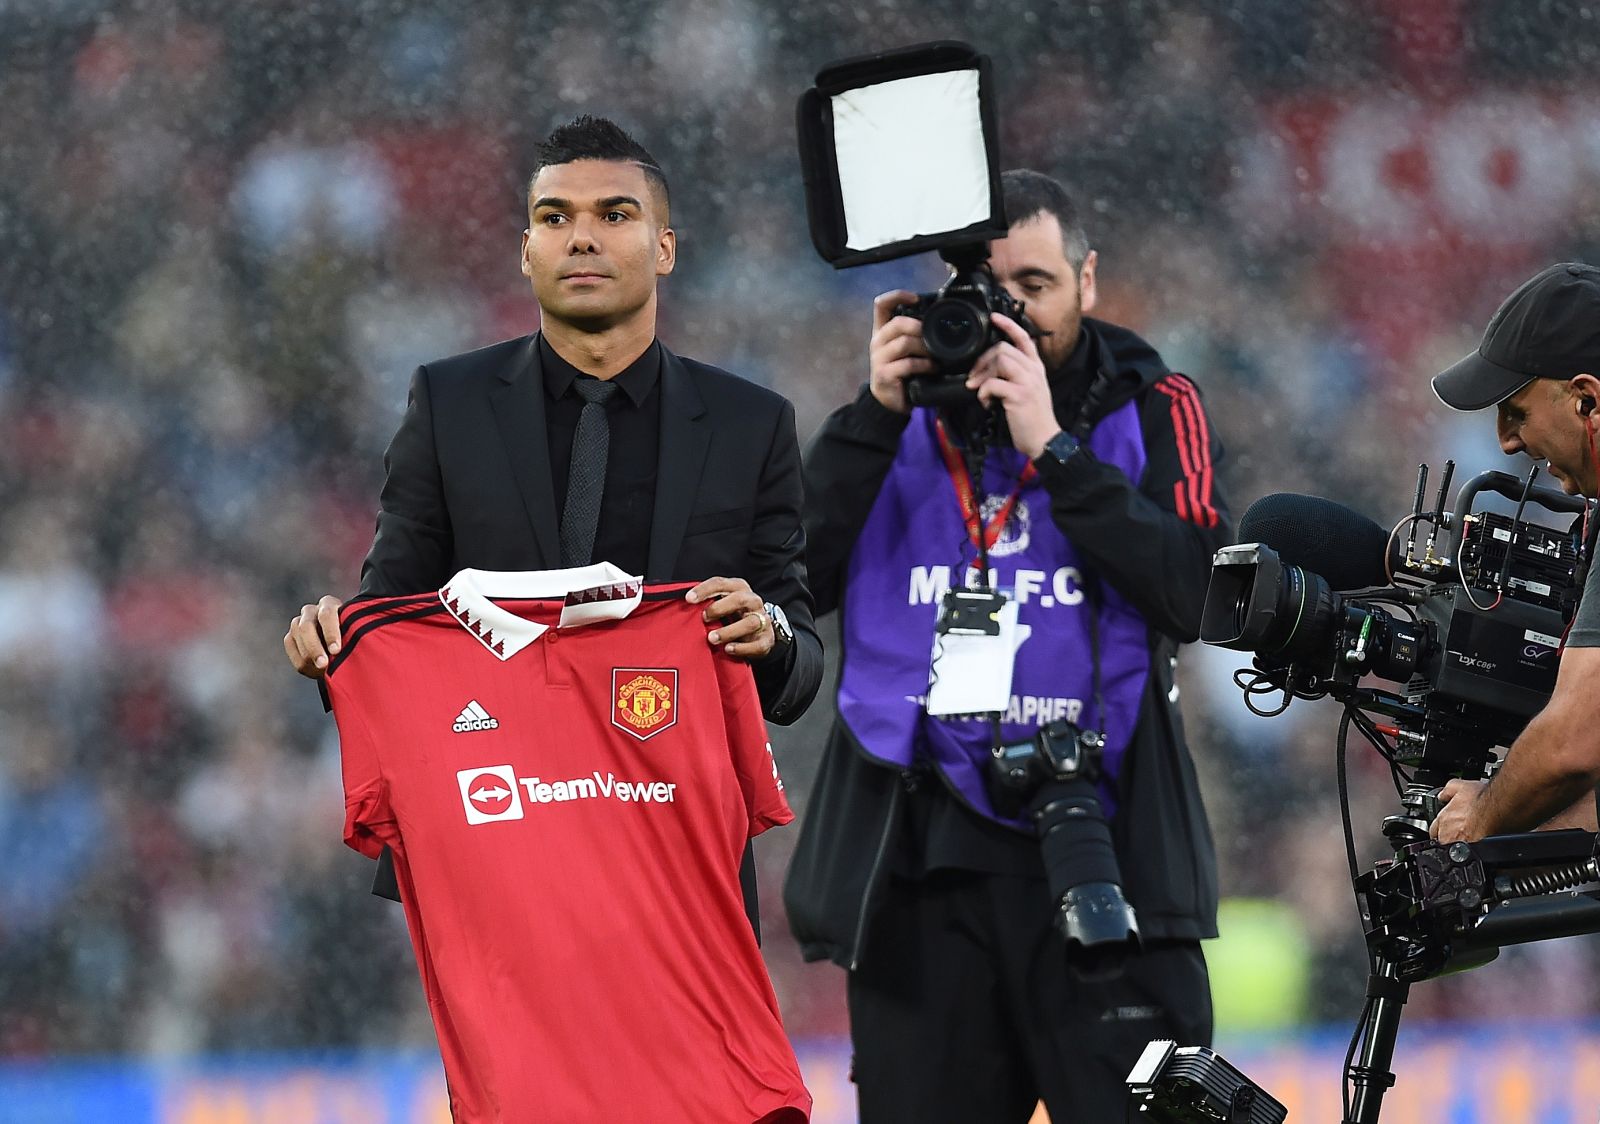 epa10133863 Newly-signed Casemiro (L) of Manchester United poses with the team's jersey on the pitch prior to the start of the English Premier League soccer match between Manchester United and Liverpool FC in Manchester, Britain, 22 August 2022.  EPA/PETER POWELL EDITORIAL USE ONLY. No use with unauthorized audio, video, data, fixture lists, club/league logos or 'live' services. Online in-match use limited to 120 images, no video emulation. No use in betting, games or single club/league/player publications